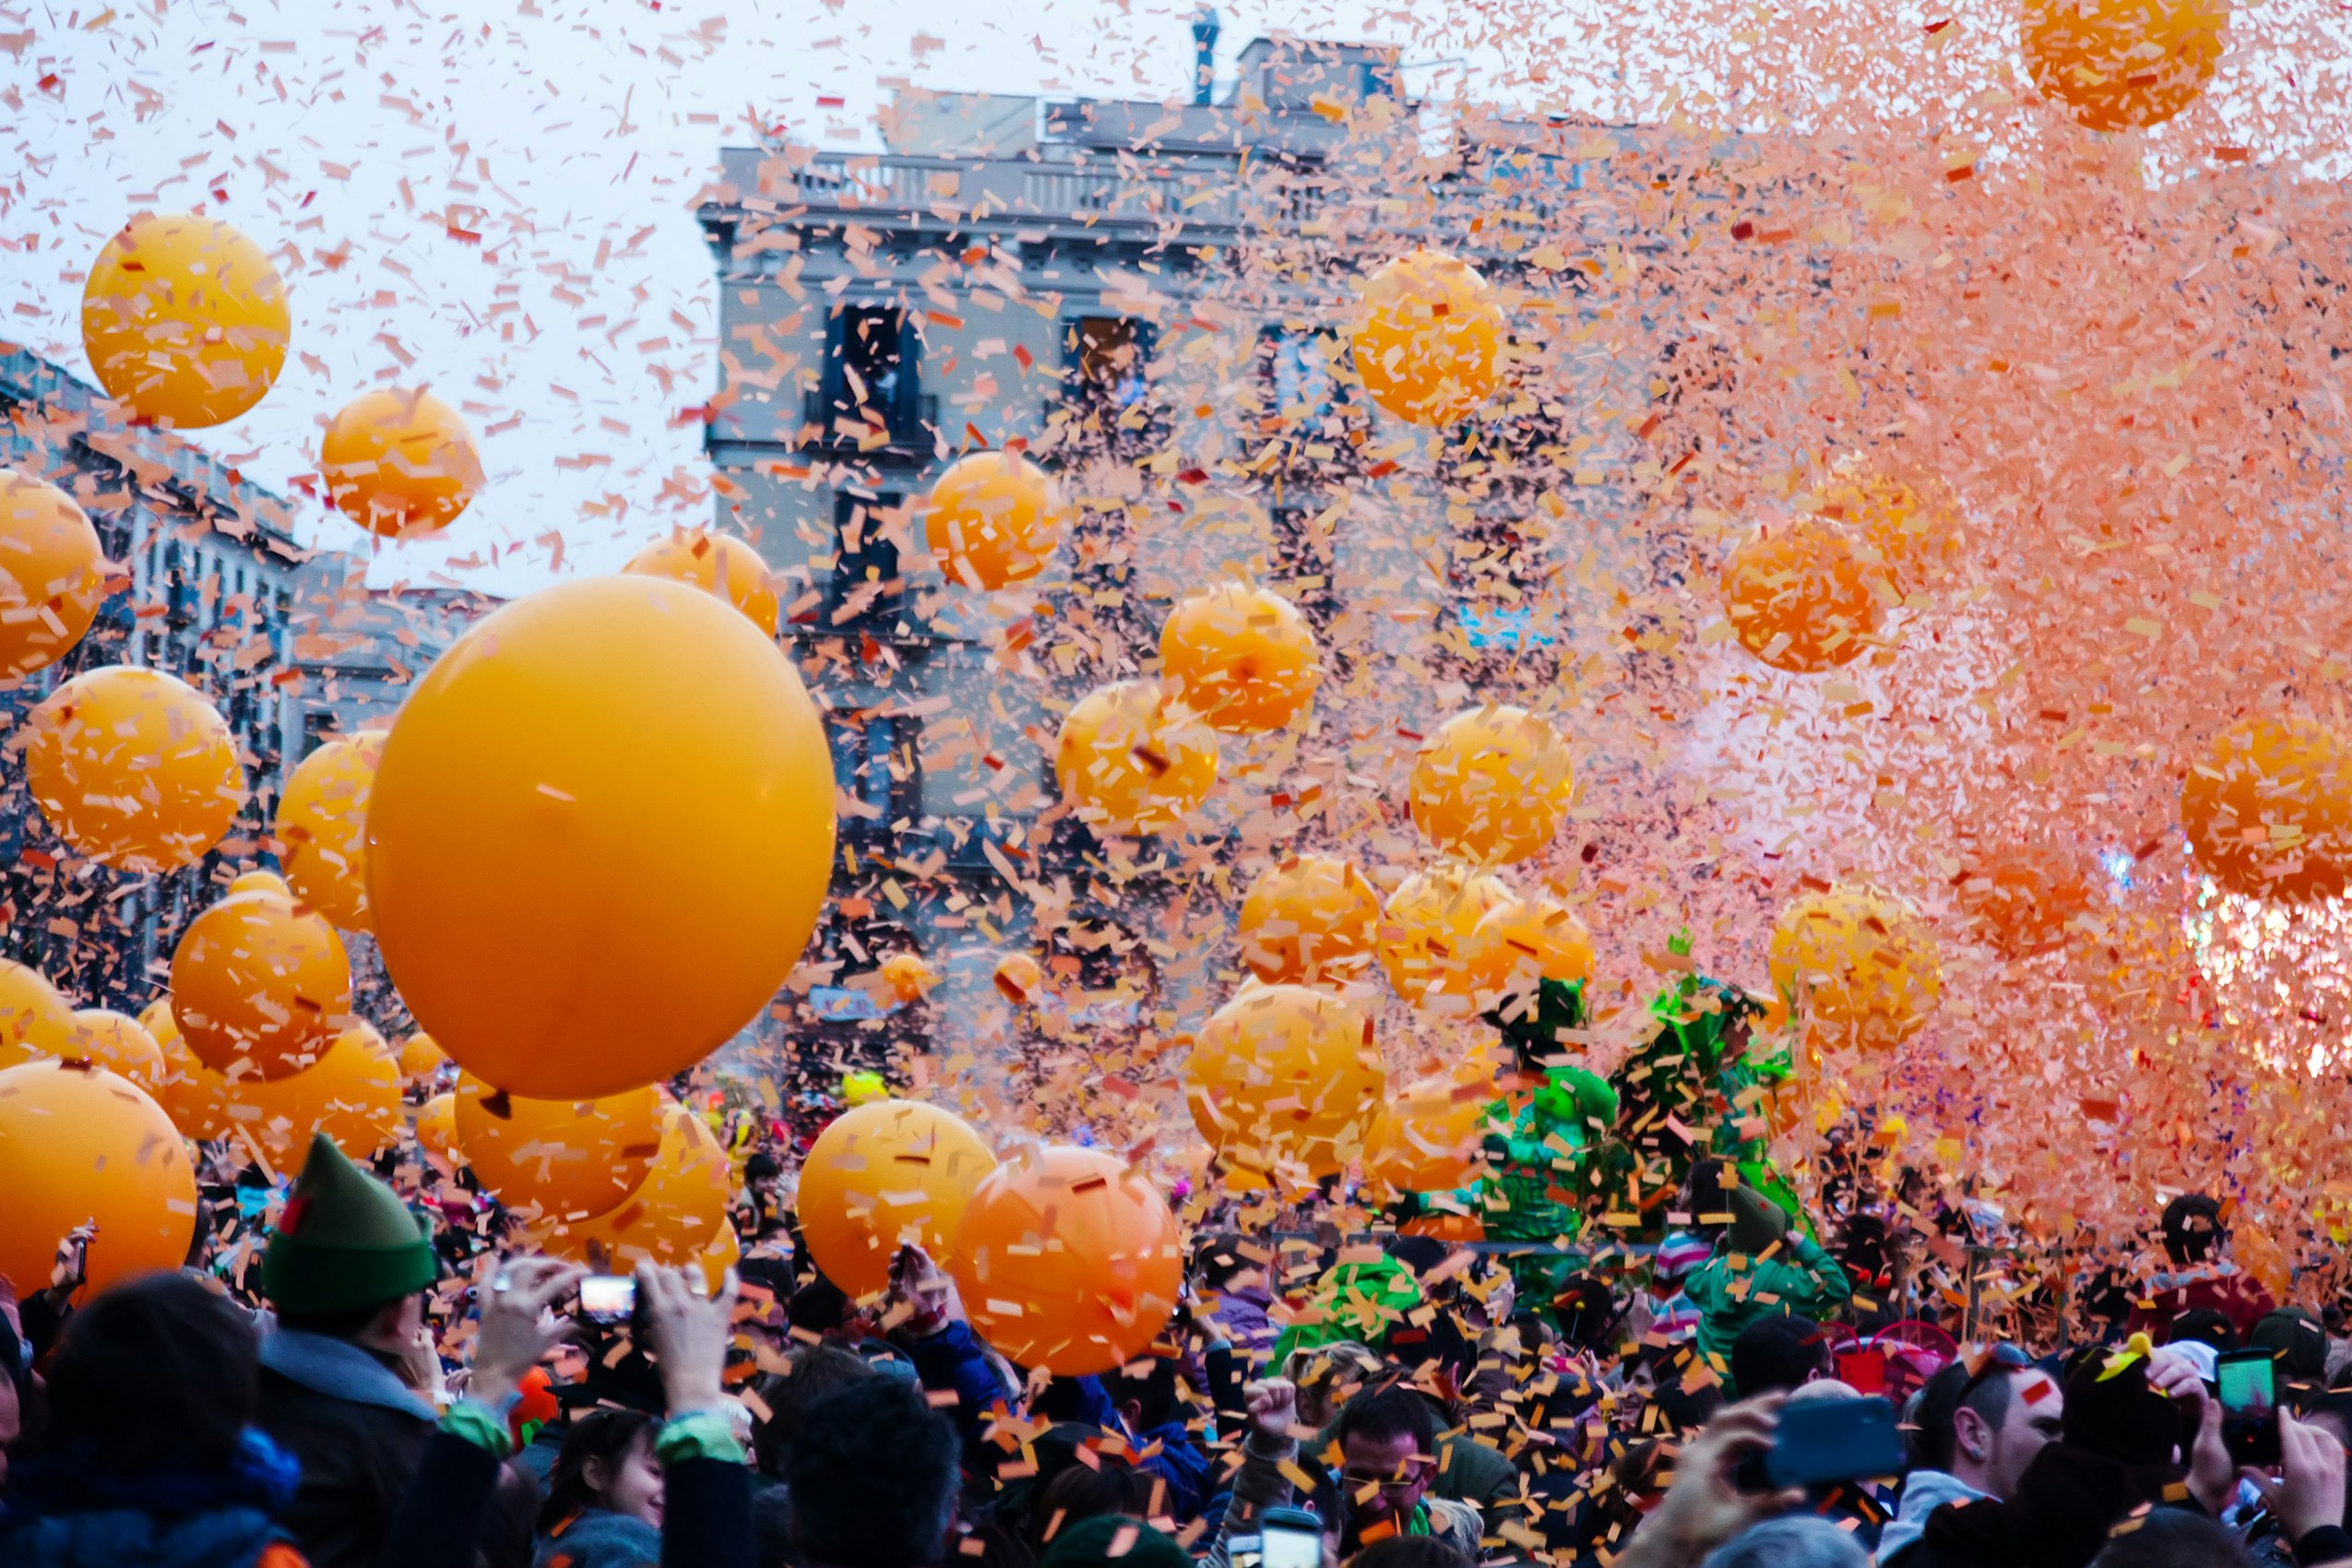 A crowd stands under a shower of orange confetti in Barcelona, as large orange balloons float in the air.